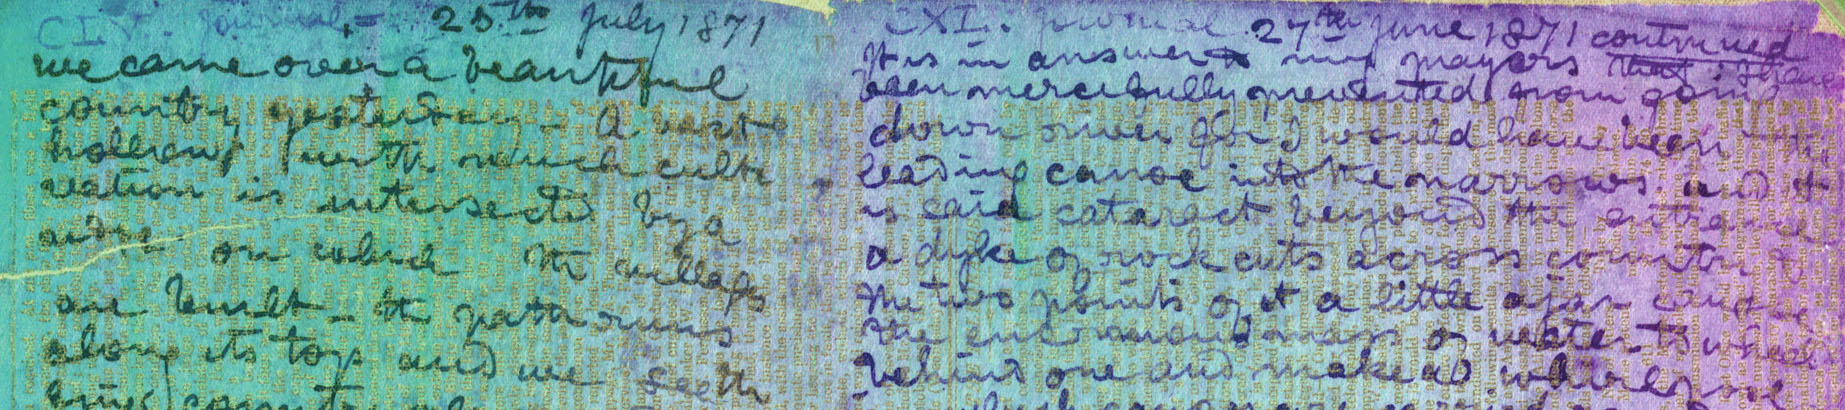 A processed spectral image of two pages of the 1871 Field Diary (Livingstone 1871f:CLV-CXL pcar721r), detail. Copyright David Livingstone Centre, Blantyre. As relevant, copyright Dr. Neil Imray Livingstone Wilson. Creative Commons Attribution-NonCommercial 3.0 Unported (https://creativecommons.org/licenses/by-nc/3.0/).